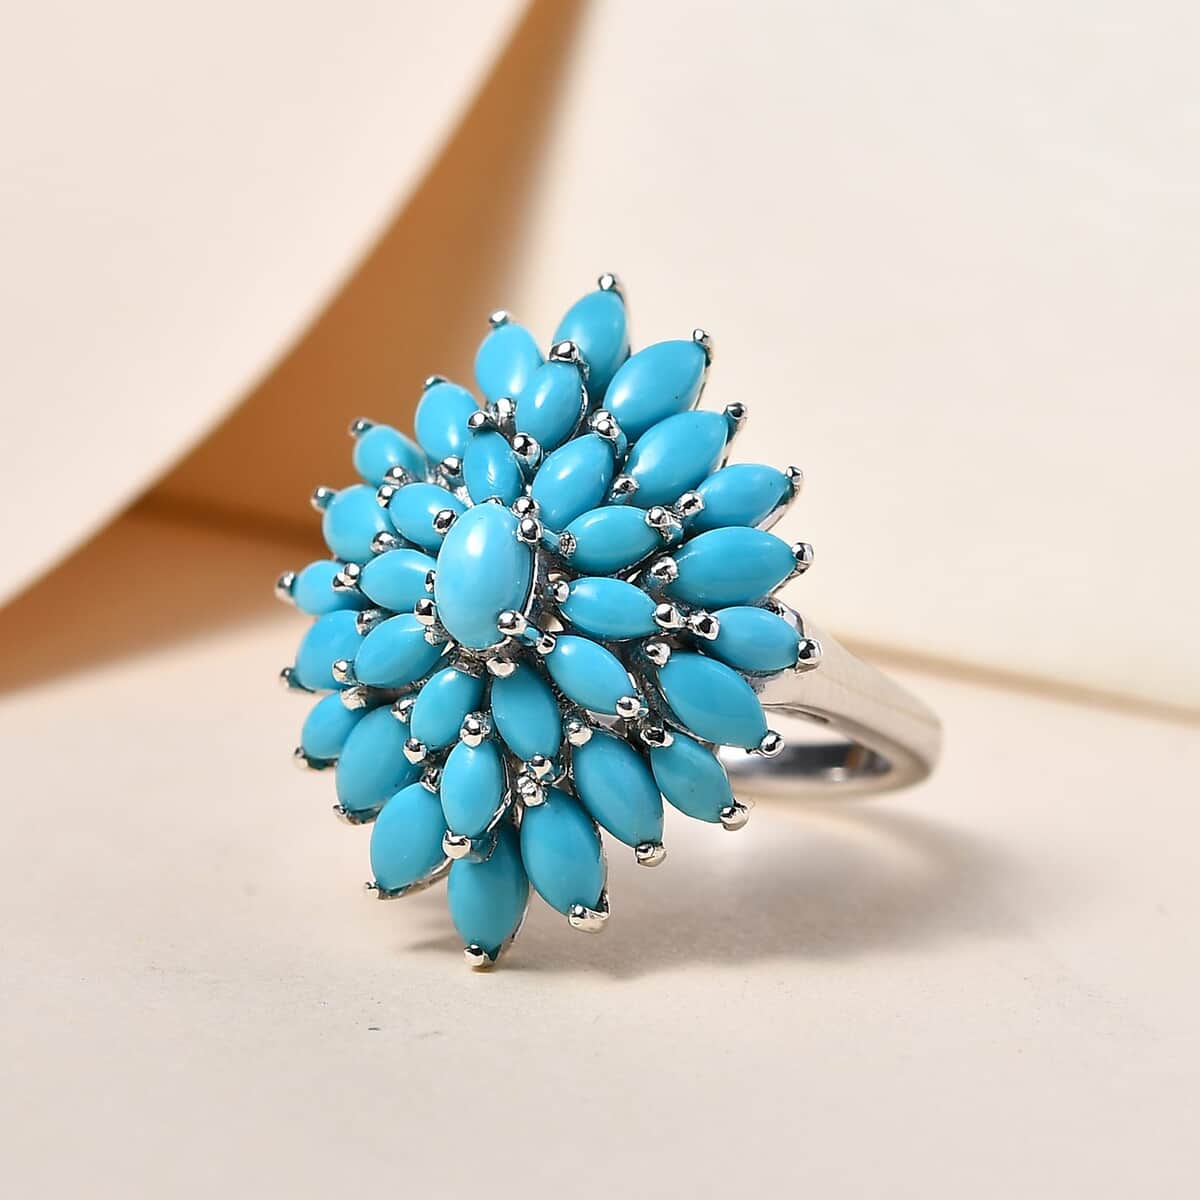 doorbuster-american-natural-sleeping-beauty-turquoise-floral-spray-ring-in-platinum-over-sterling-silver-size-10.0-3.75-ctw image number 1